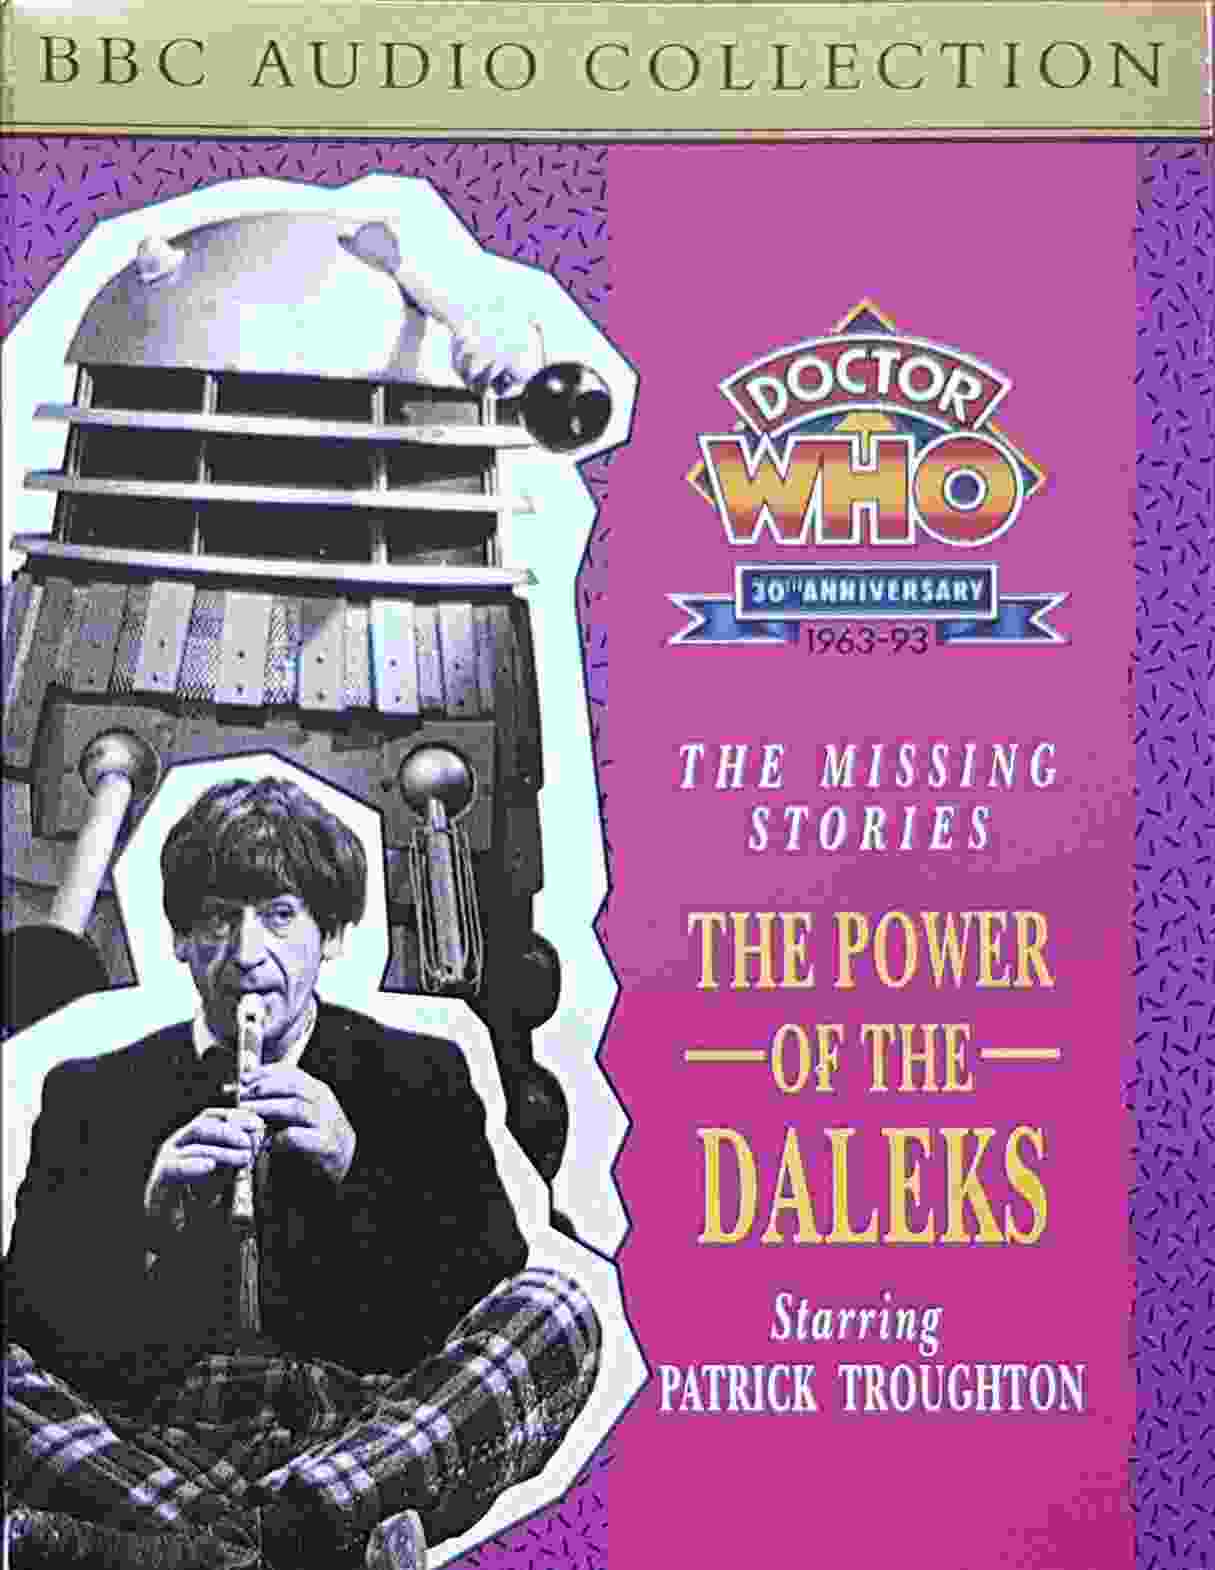 Picture of Doctor Who - Power of the Daleks by artist David Whitaker from the BBC cassettes - Records and Tapes library